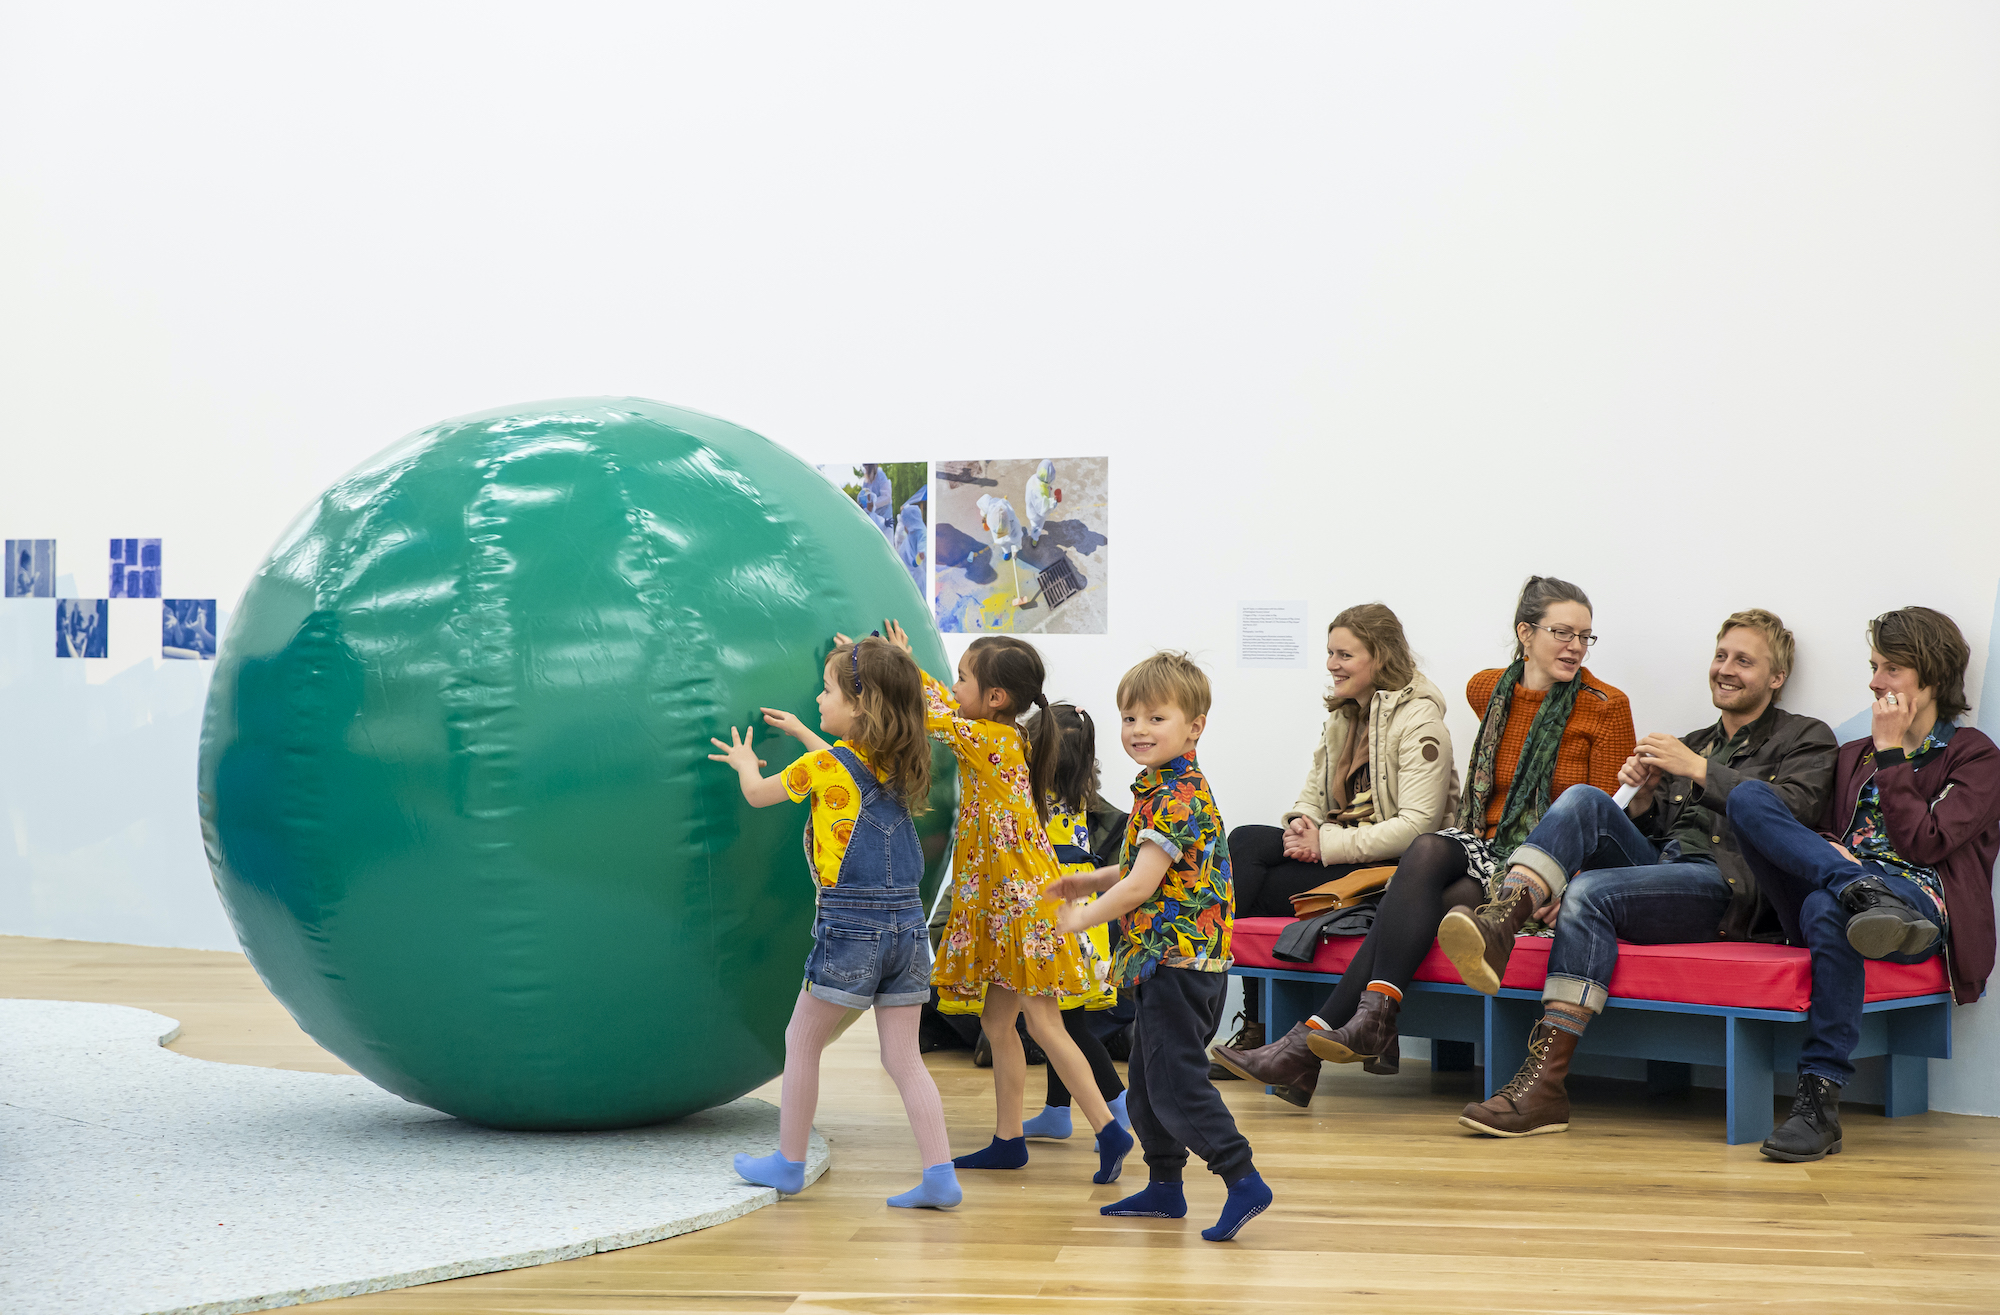 Children push a giant ball in a gallery space